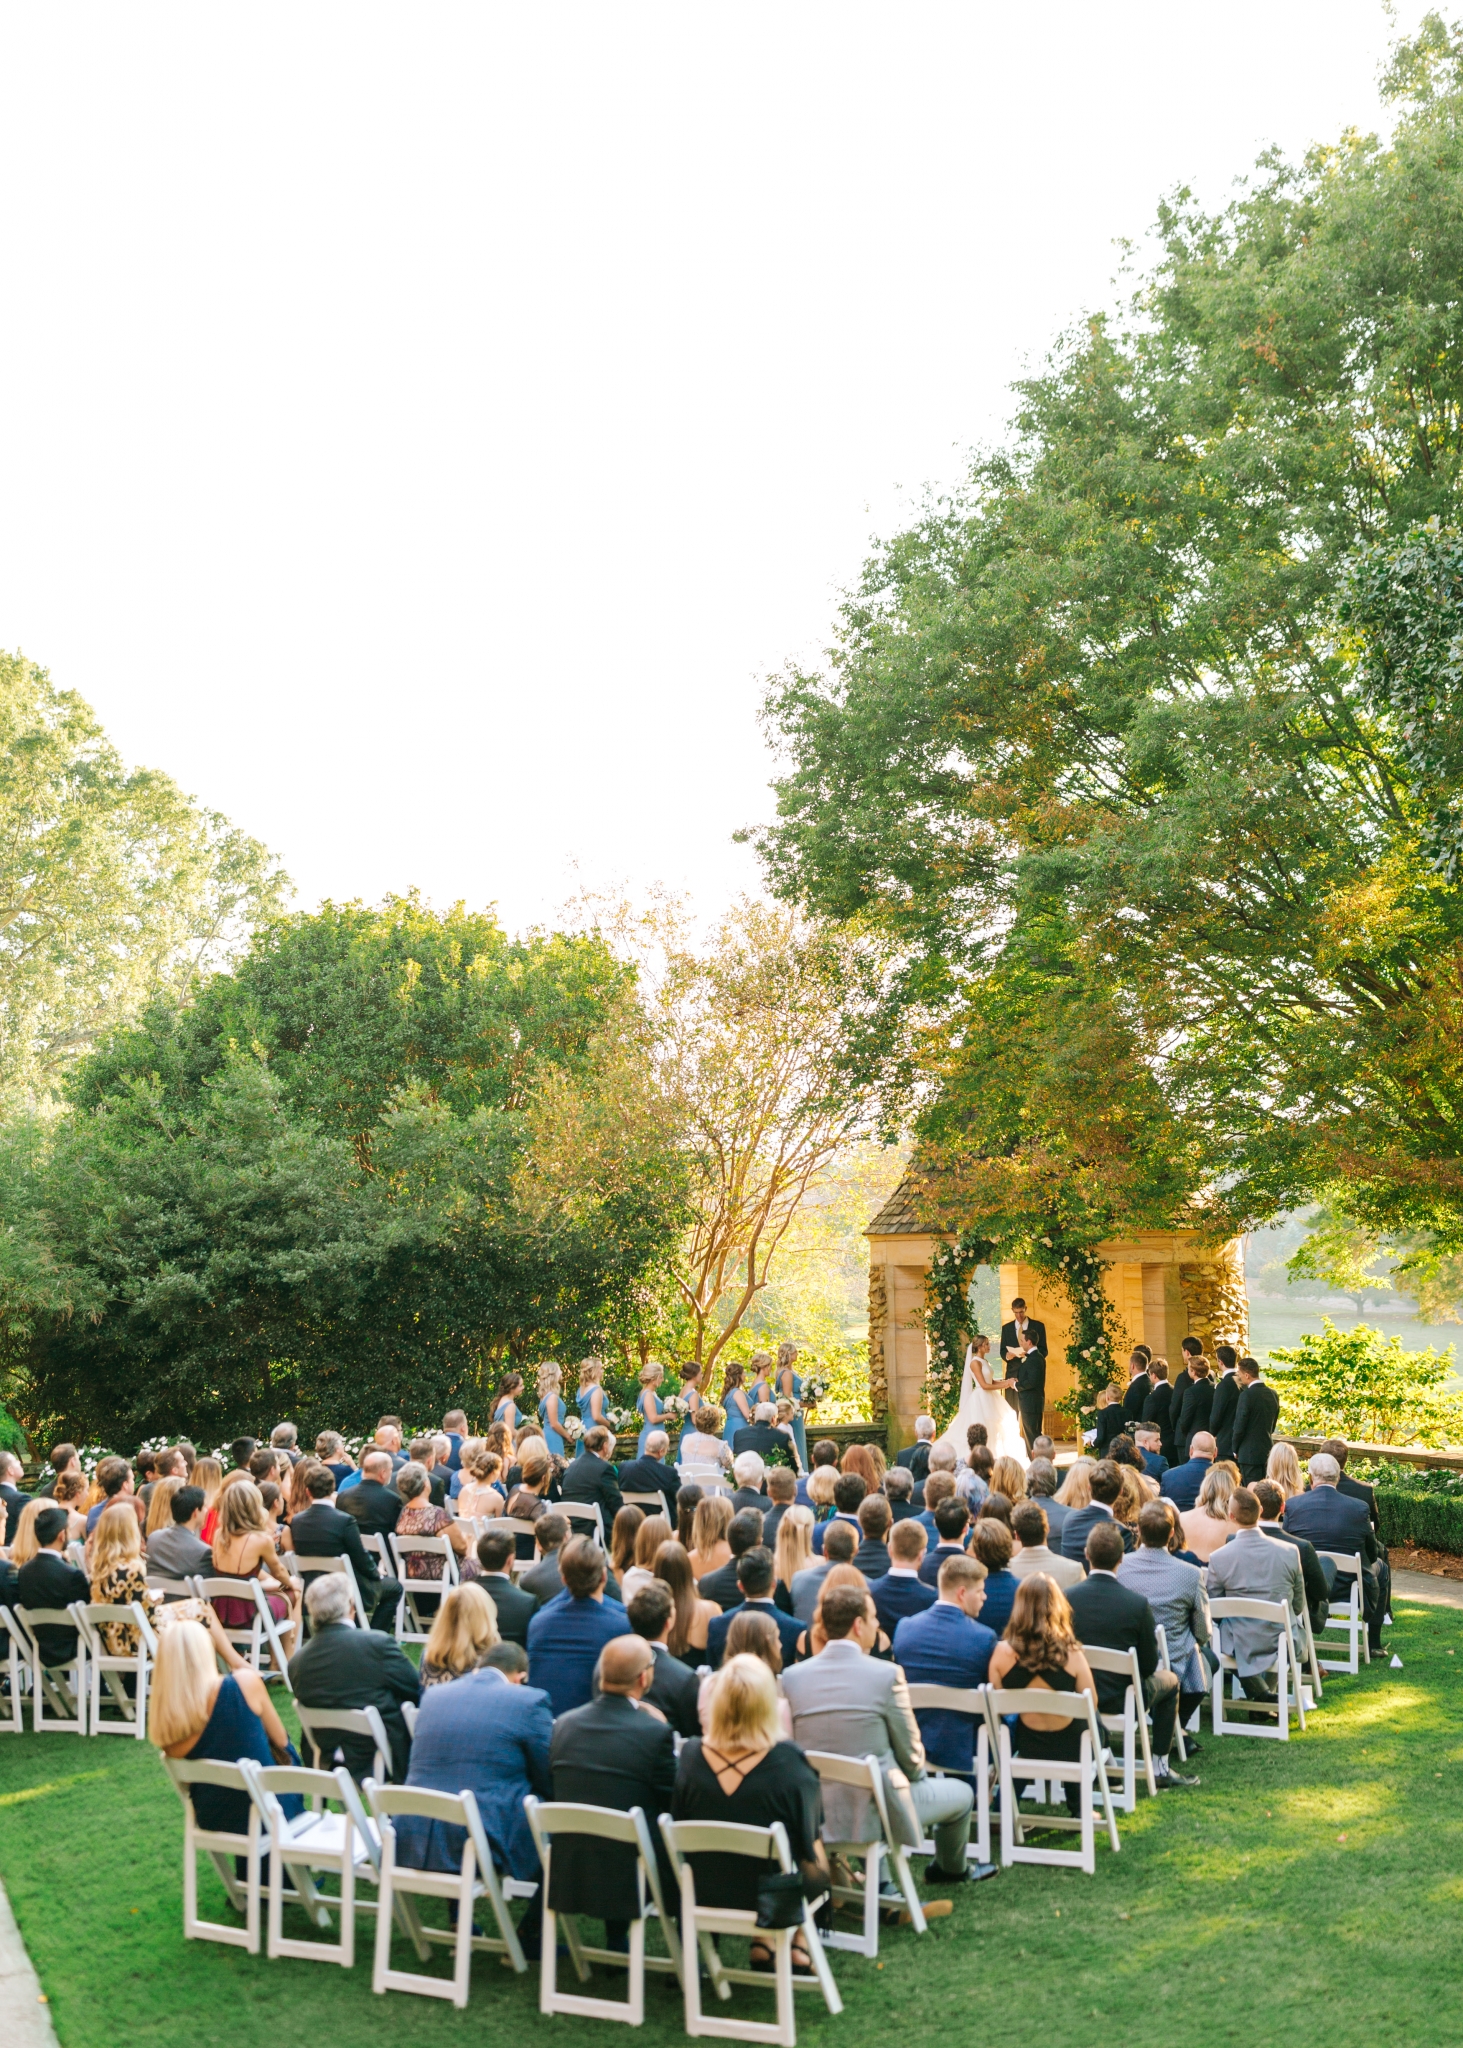 Winston Salem Wedding Photographer documents a wedding ceremony on the lawn at The Graylyn Estate in Winston-Salem